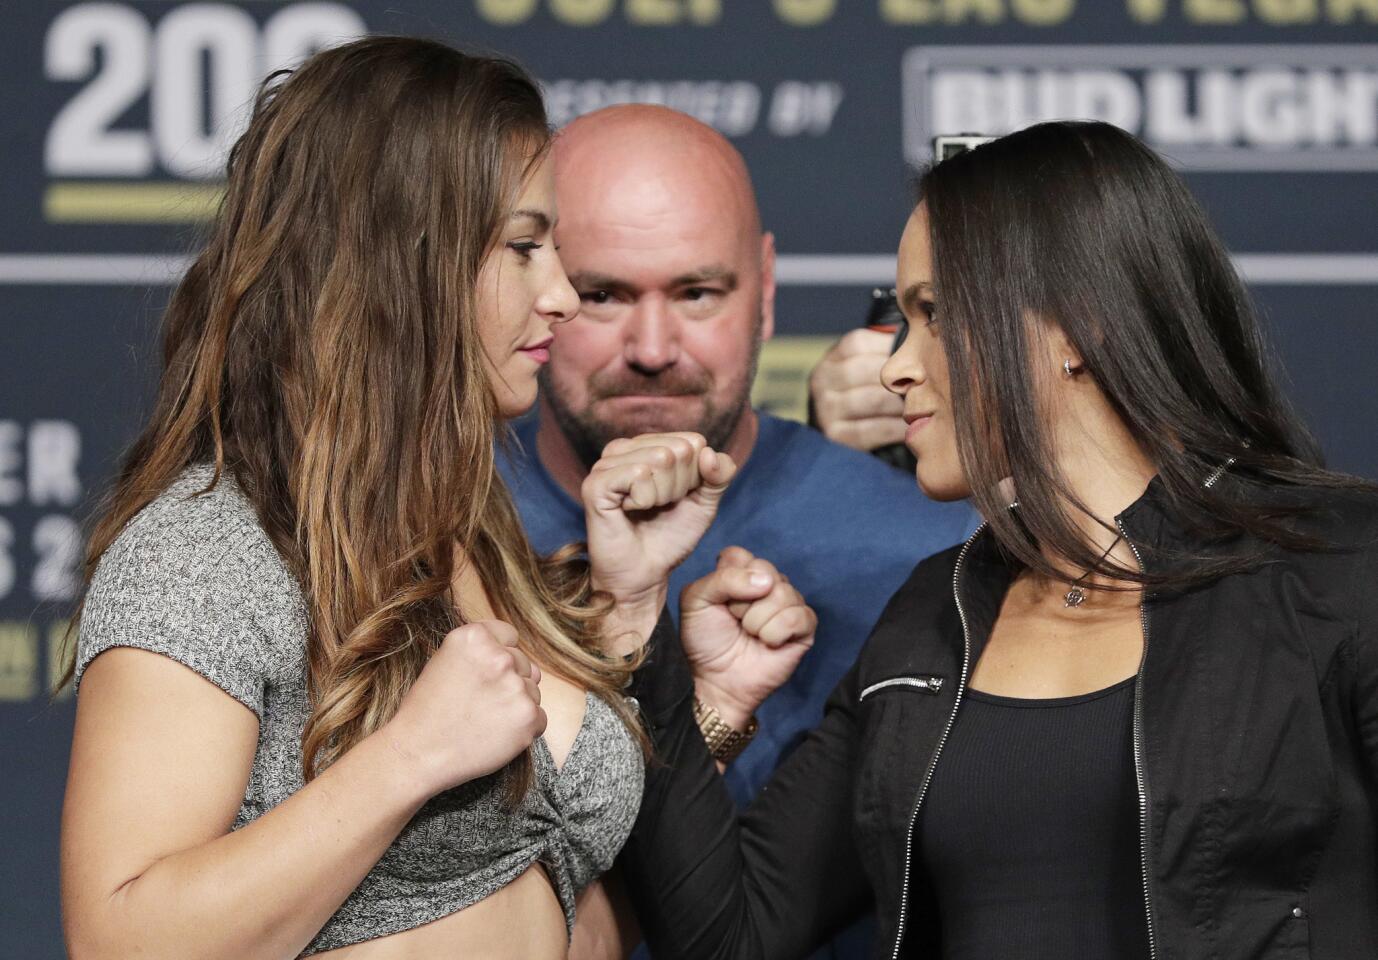 Miesha Tate, left, and Amanda Nunes pose for photographers during a UFC 200 mixed martial arts news conference, Wednesday, July 6, 2016, in Las Vegas. The two are scheduled to fight in a women's bantamweight championship fight at UFC 200 on Saturday. (AP Photo/John Locher)